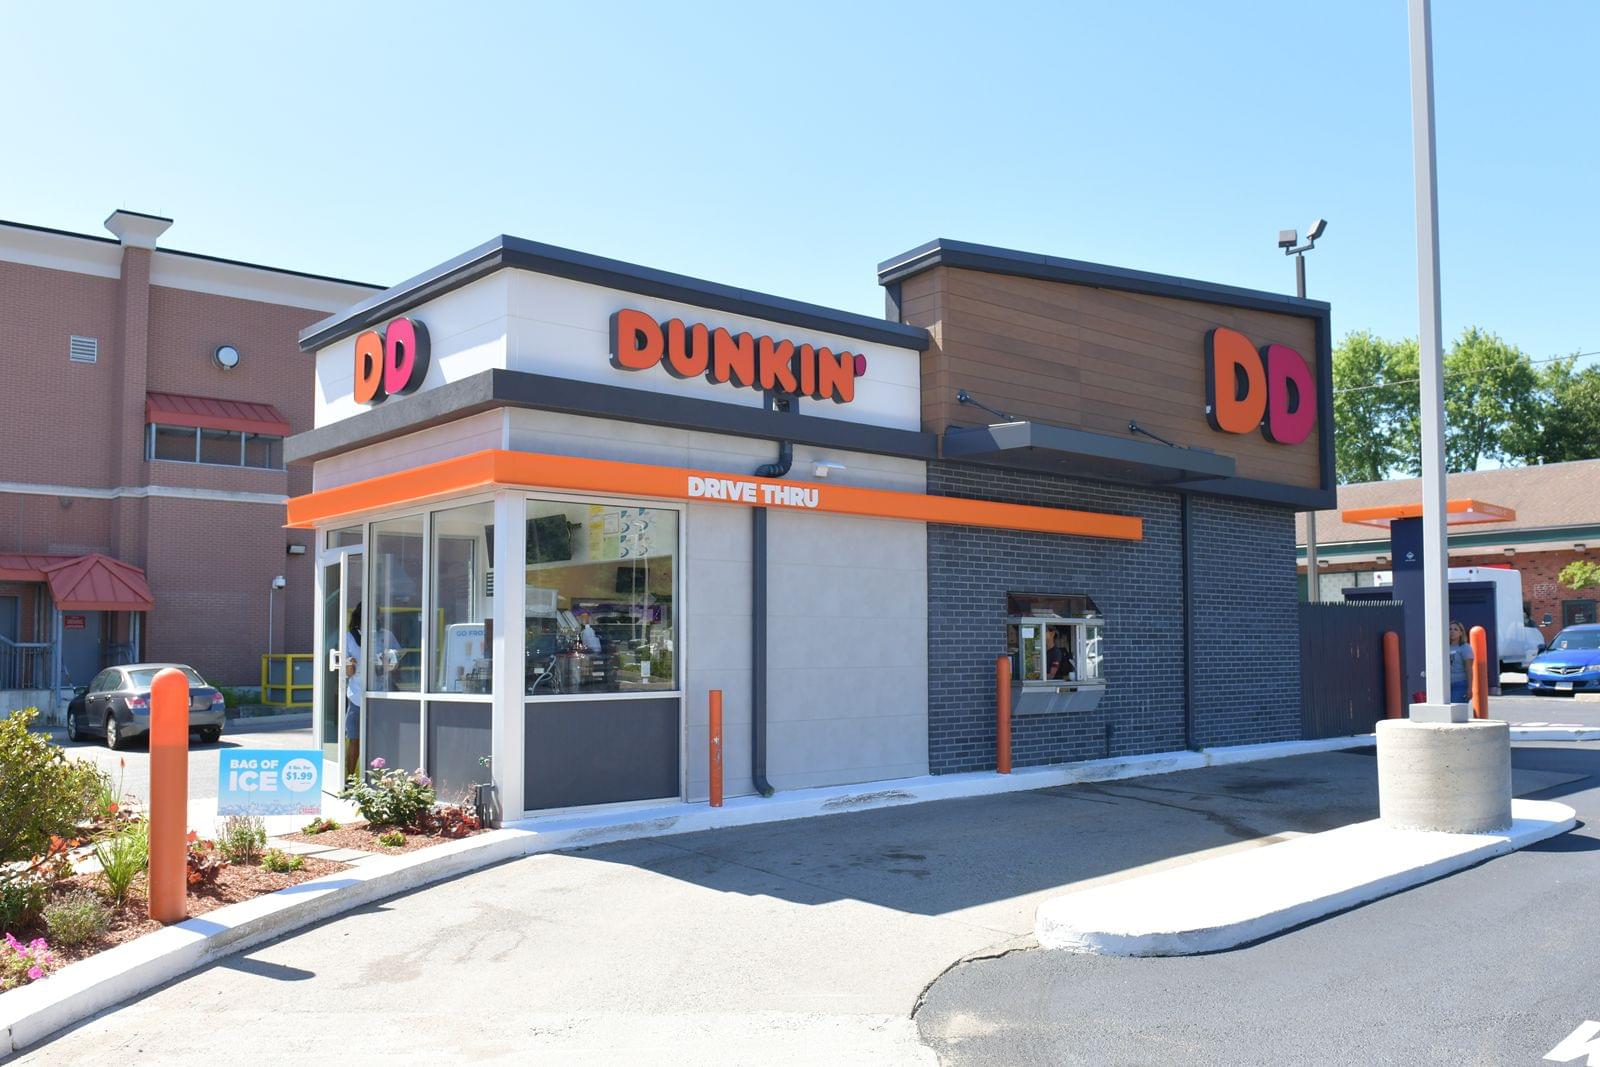 Dunkin’ opens 1st drive-thru only location in Philadelphia area